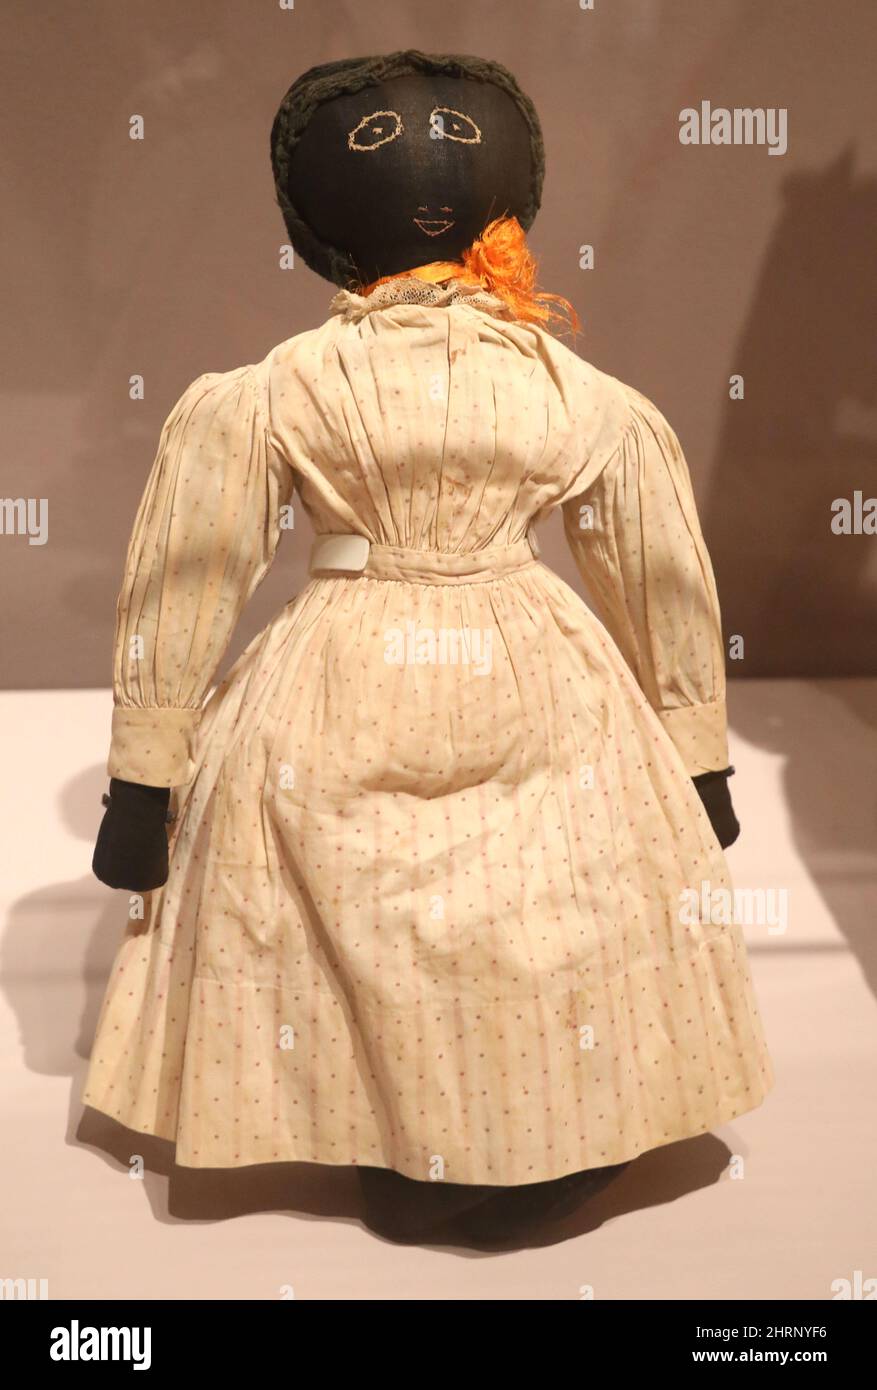 https://c8.alamy.com/comp/2HRNYF6/new-york-usa-25th-feb-2022-a-view-of-a-doll-ca-1850-60-made-by-famed-author-and-former-slave-harriet-jacobs-on-display-at-the-new-york-historical-societys-new-exhibition-of-black-dolls-which-explores-race-gender-and-history-through-doll-making-the-dolls-were-made-for-the-willis-family-her-employer-in-the-north-where-she-sought-refuge-after-hiding-in-her-grandmothers-garret-for-7-years-credit-image-nancy-kaszermanzuma-press-wire-credit-zuma-press-incalamy-live-news-2HRNYF6.jpg